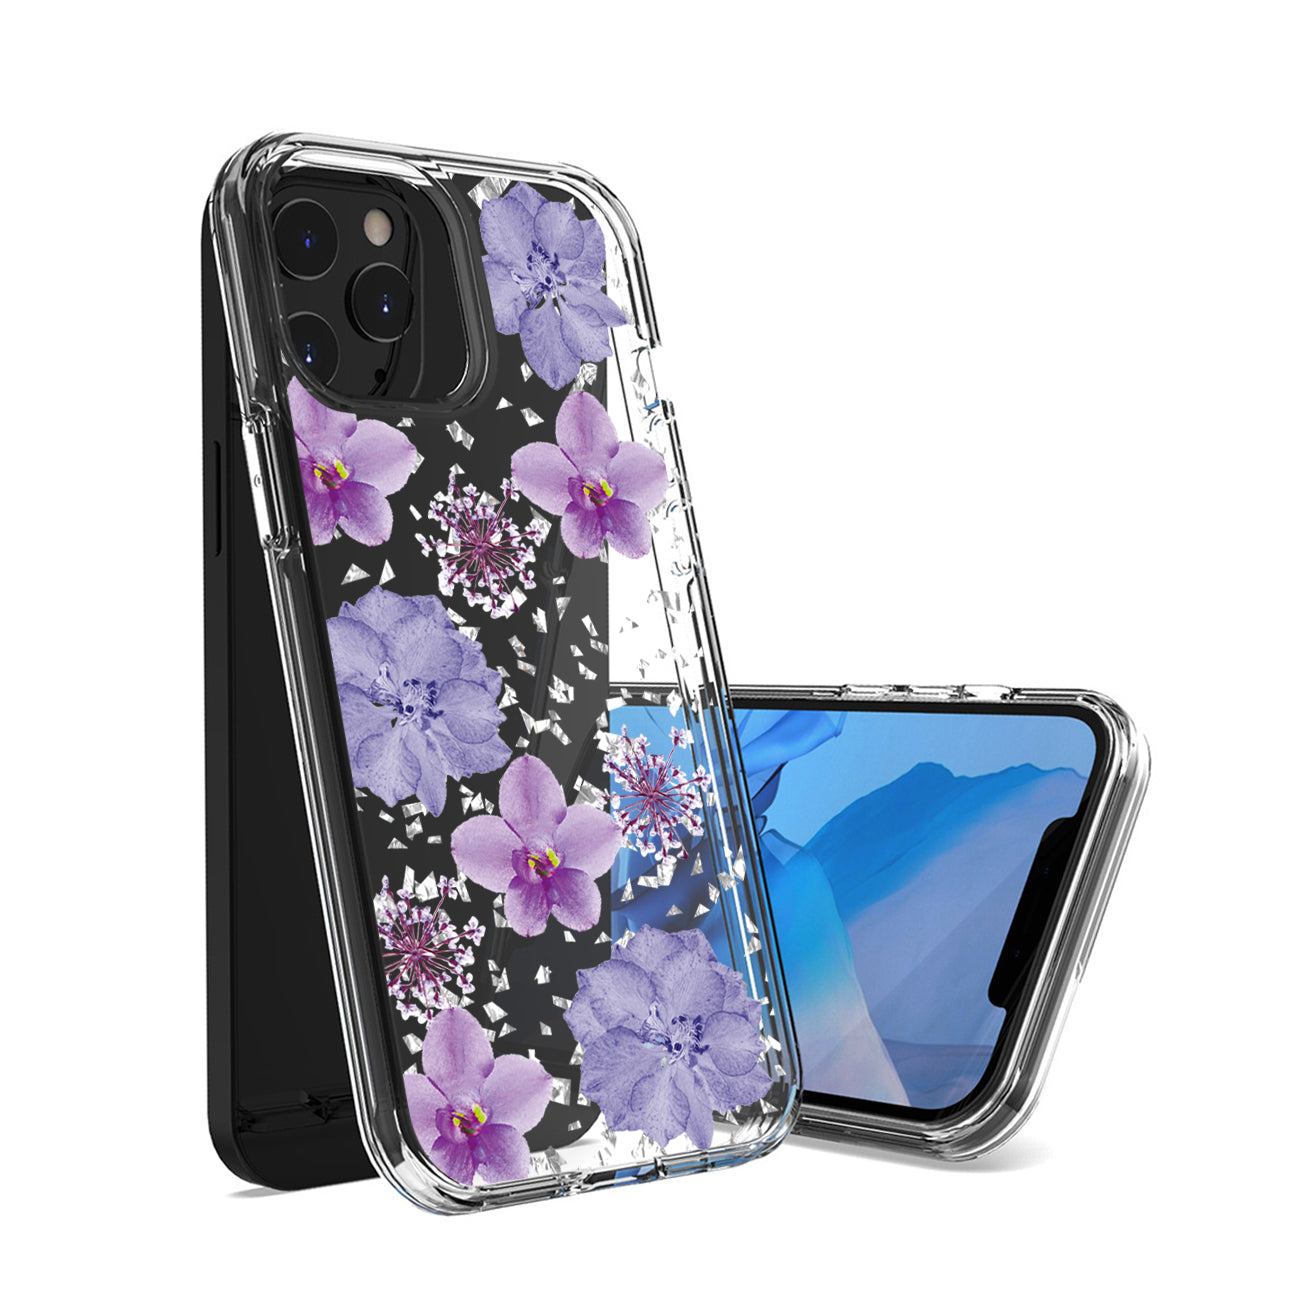 Pressed dried flower Design Phone case for APPLE IPHONE 11 PRO MAX in Purple